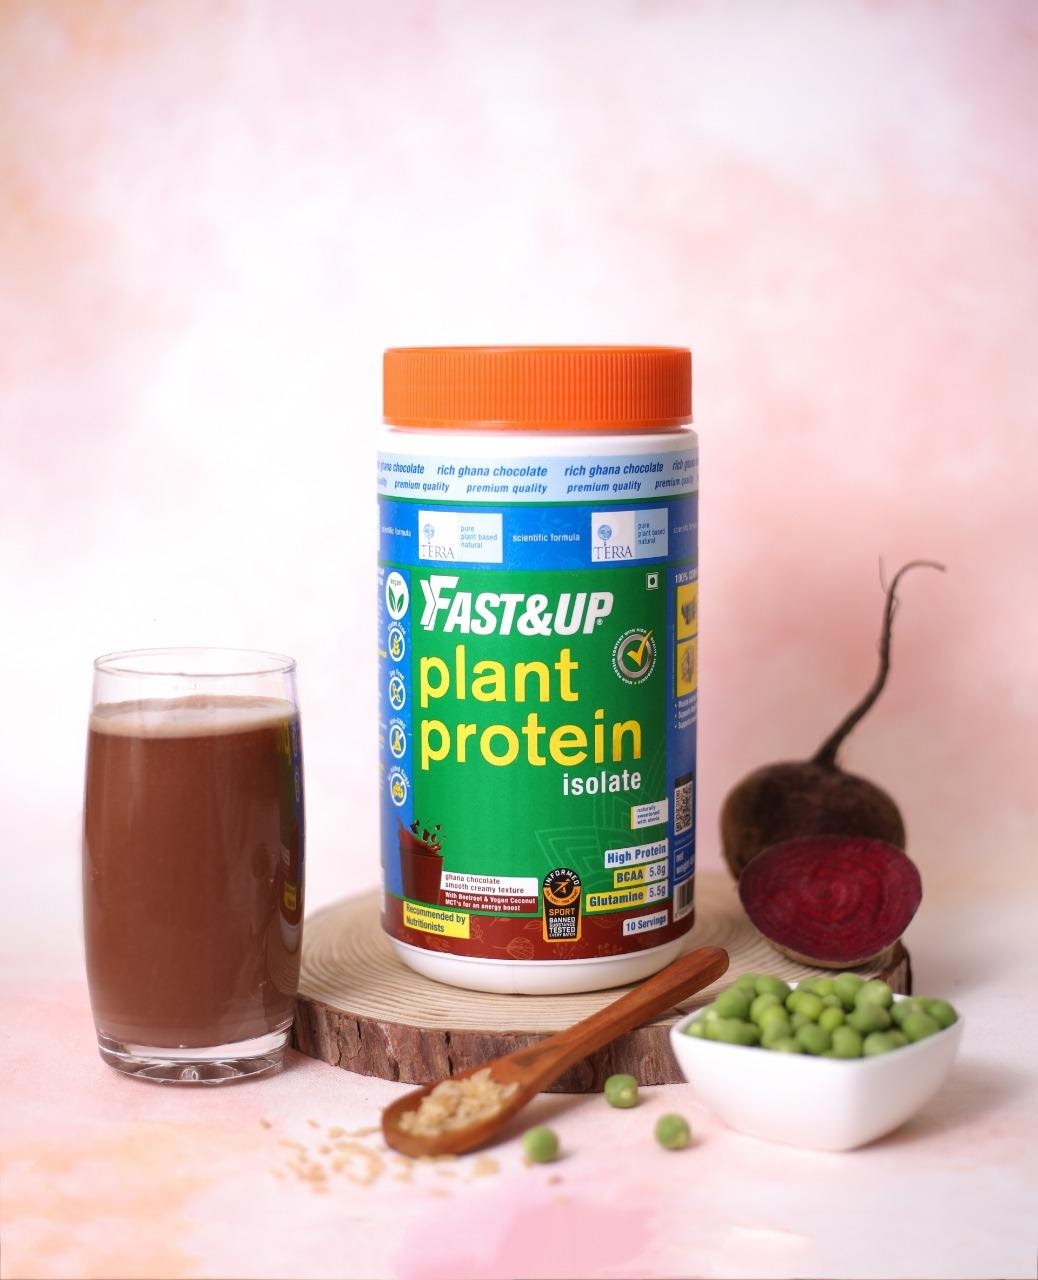 Plant Protein Isolate Supplements for Football Players - Fast&Up